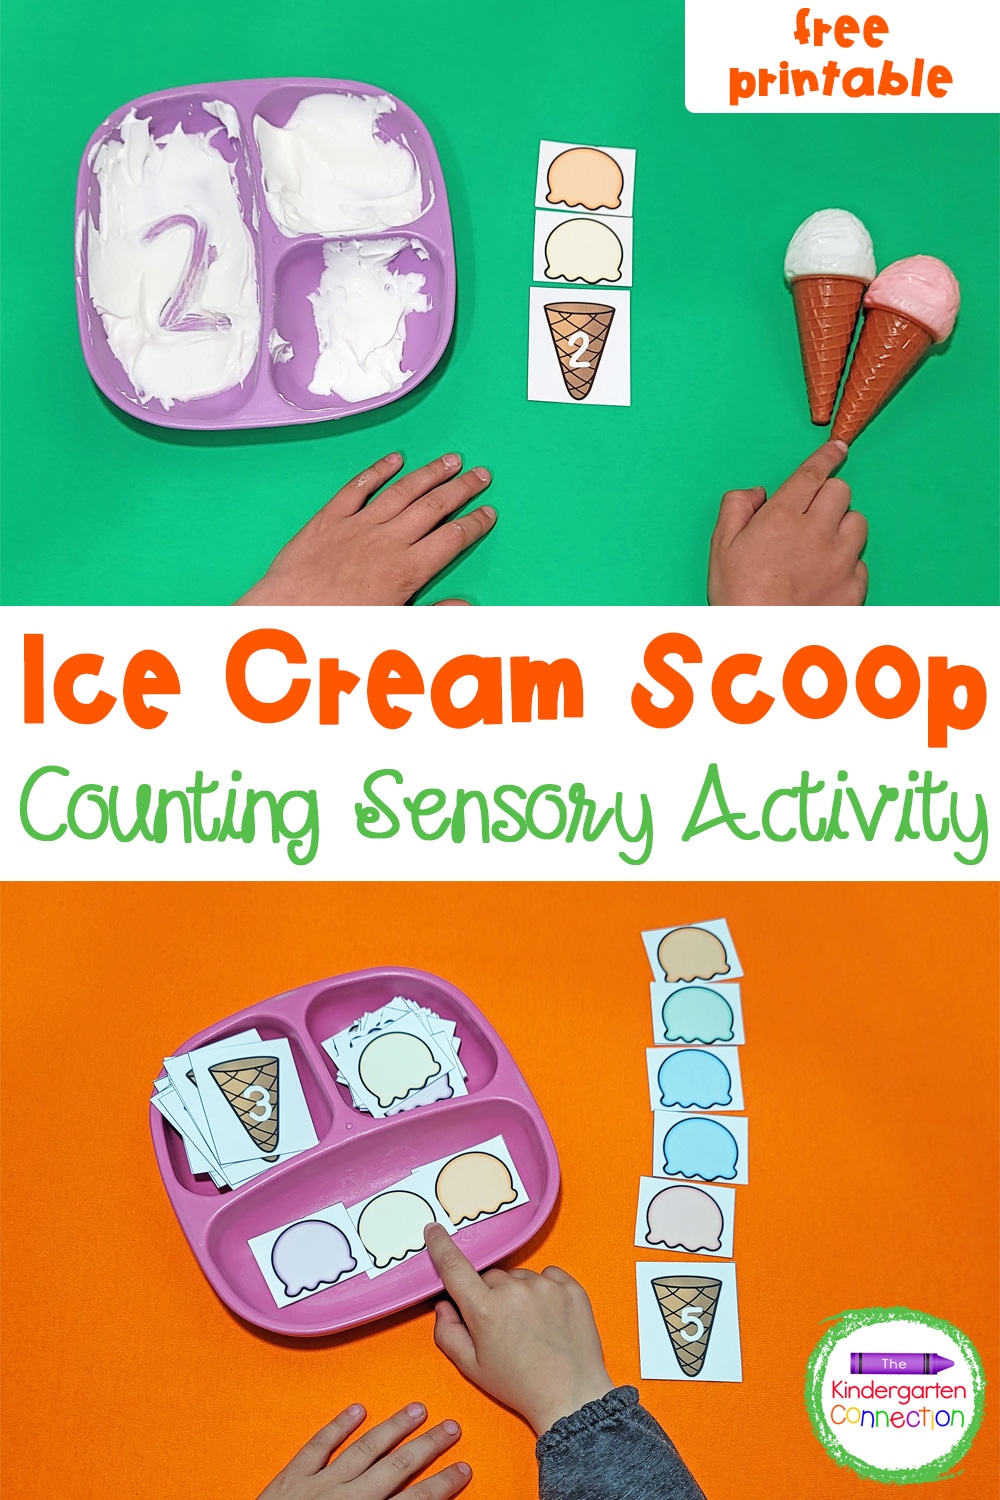 Grab these free Ice Cream Scoop Counting Sensory Activity printables and have fun counting in a whole new way this summer!